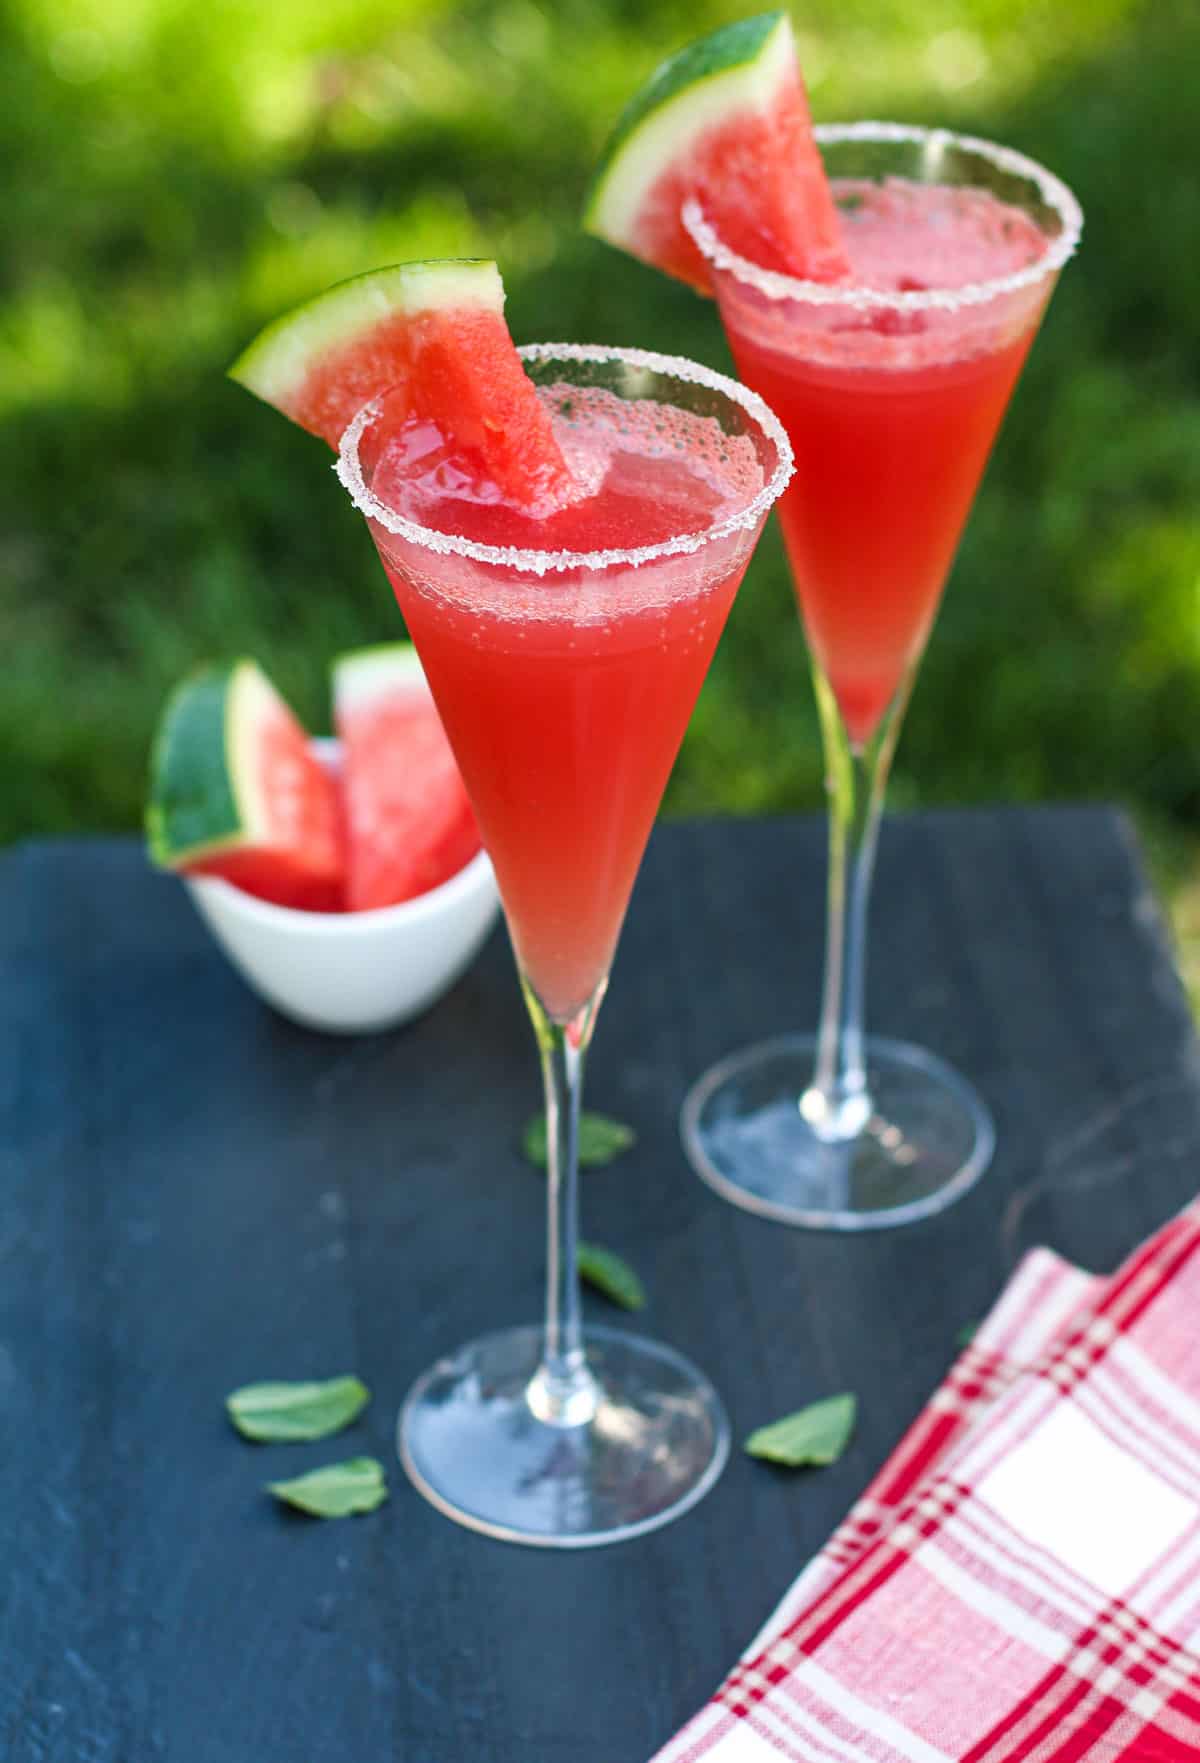 Two watermelon cocktails in wine stems garnished with watermelon wedges